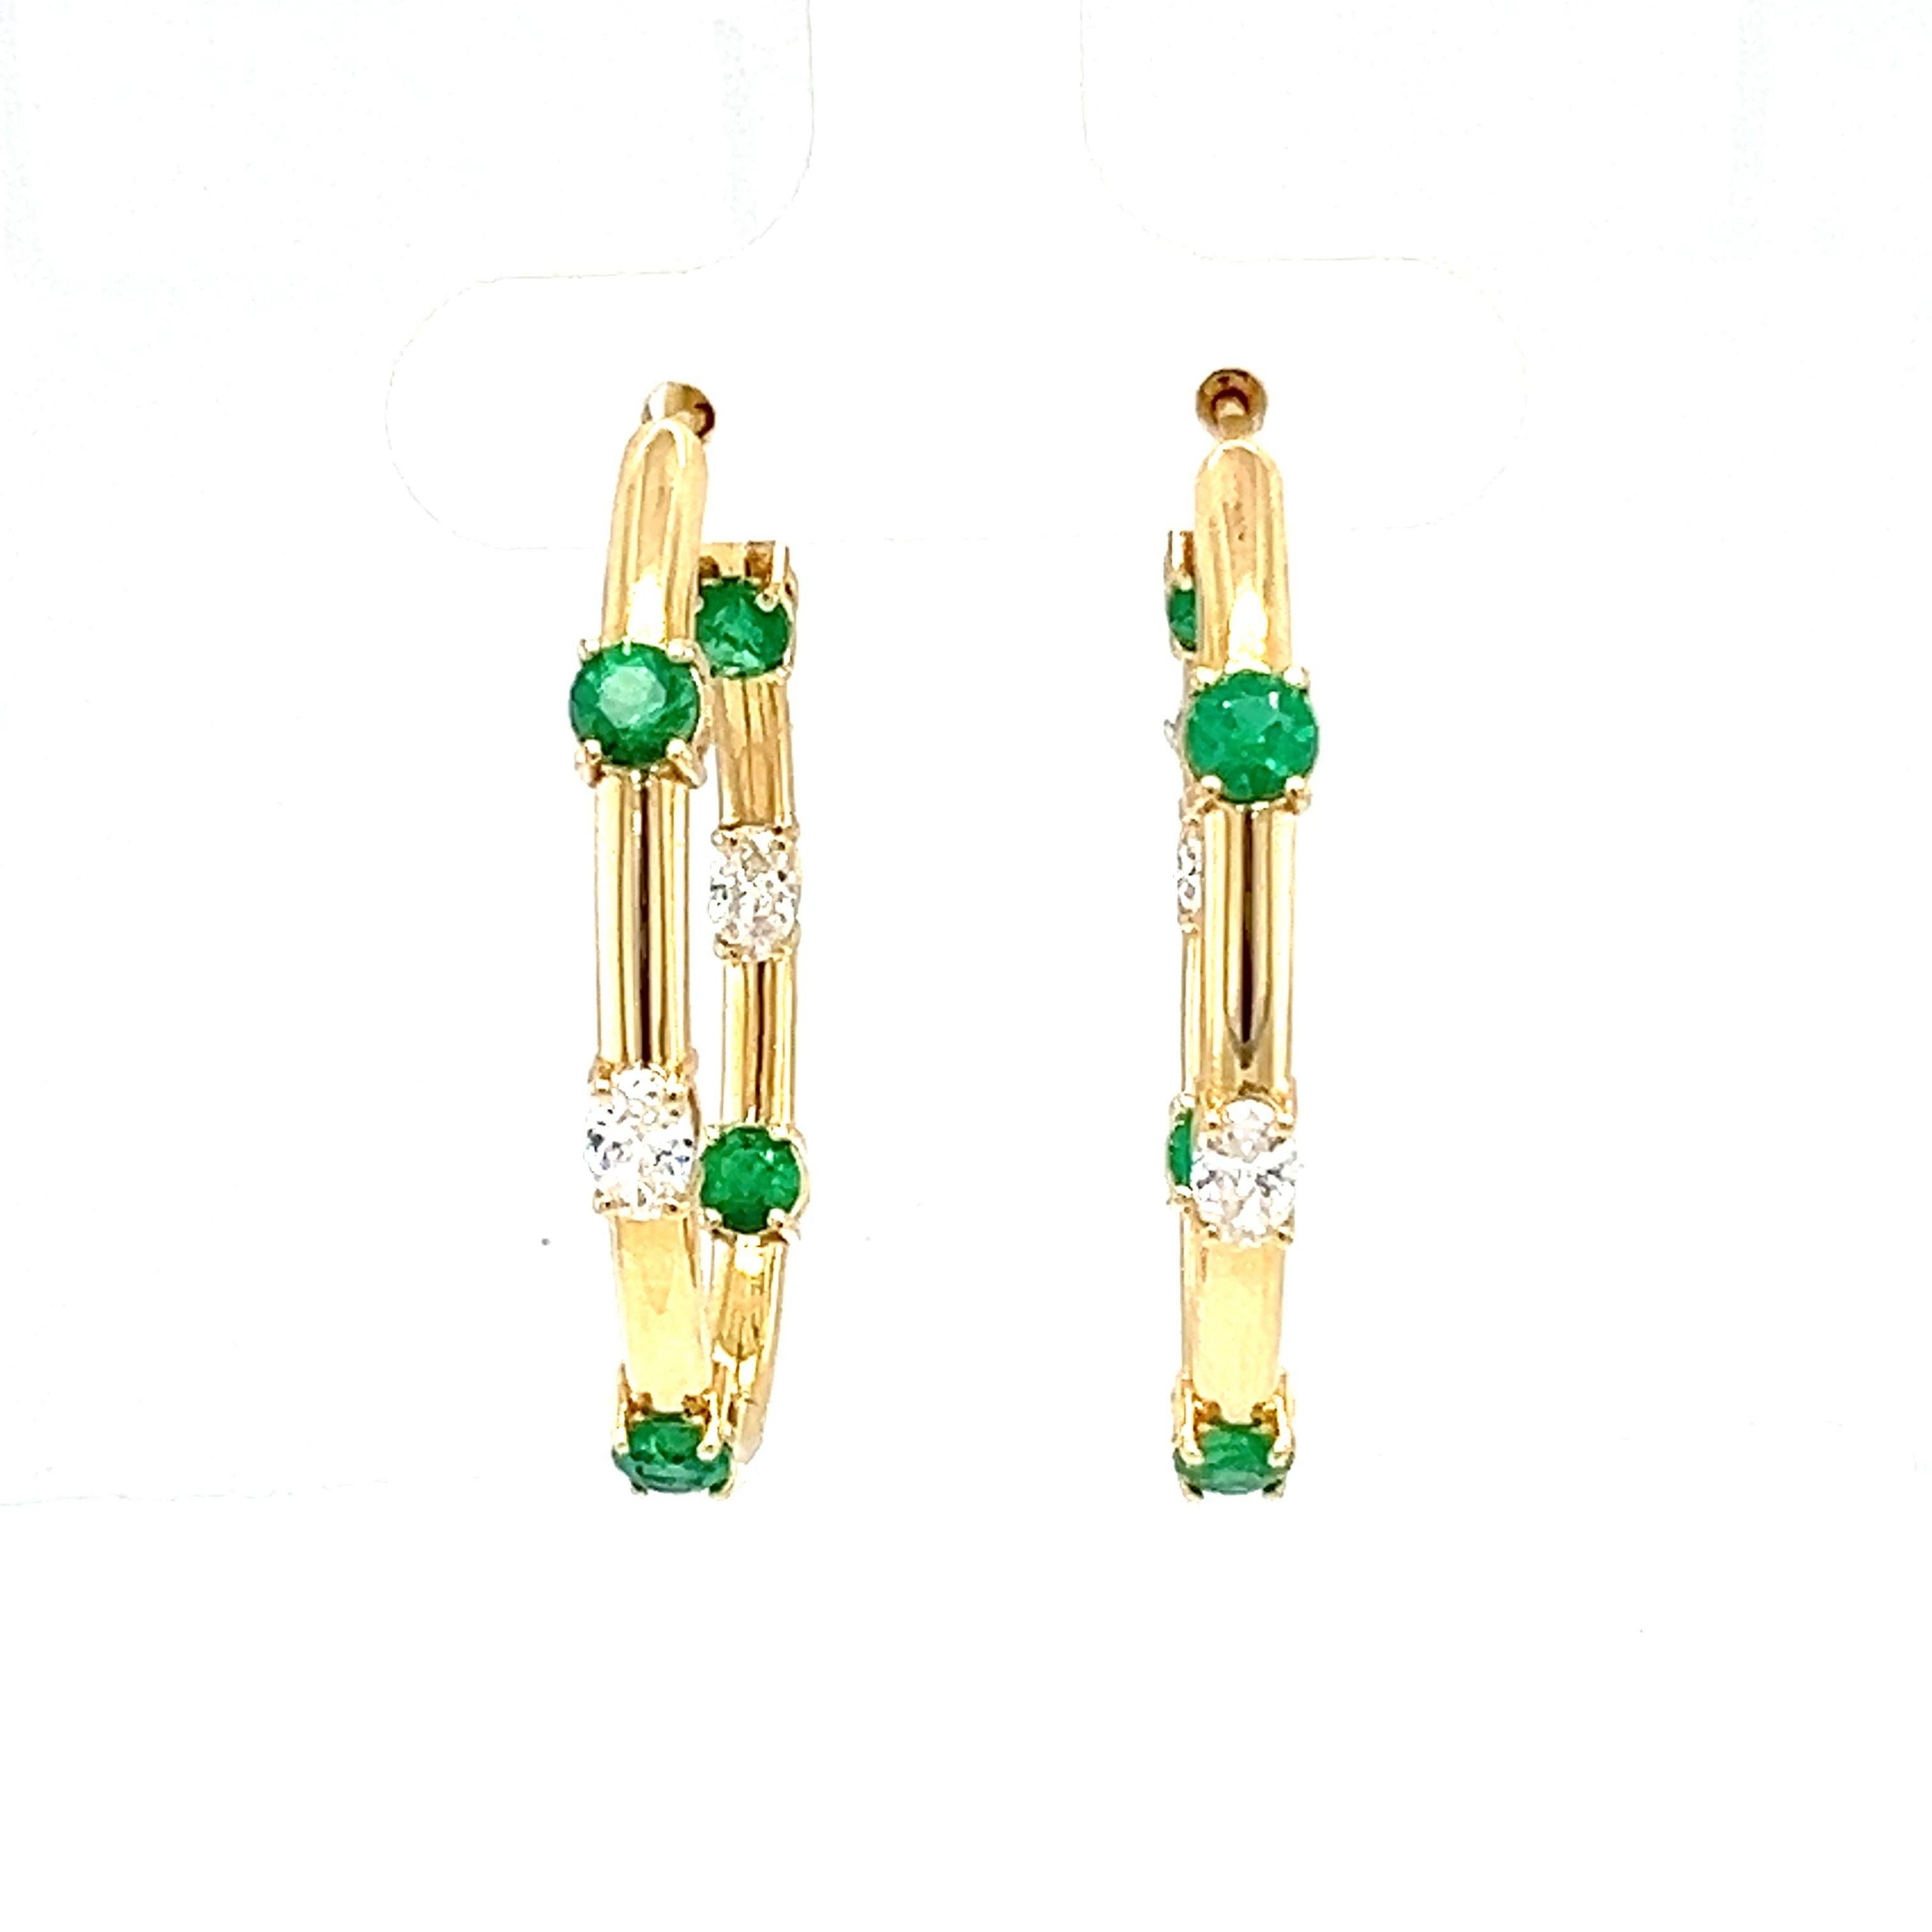 These stunning pair of 18-karat yellow gold hoop earrings set with 1.65-carat oval-shaped emeralds and 0.80-carat oval-shaped diamonds are made of natural emerald and diamond. 